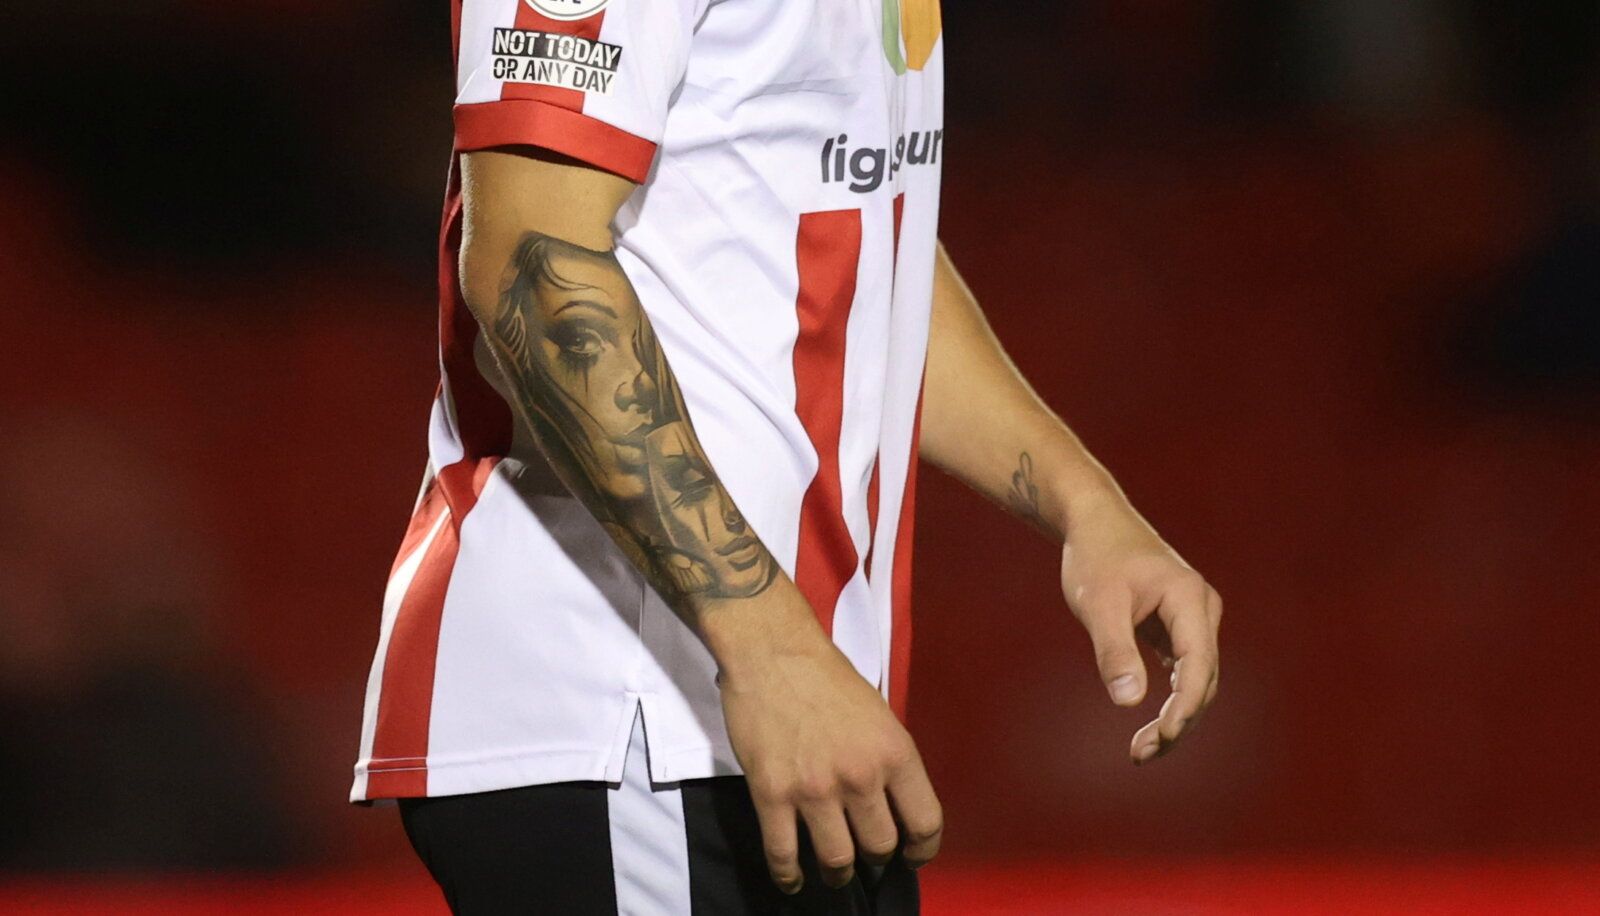 Soccer Football - EFL Trophy - Group Stage - Lincoln City v Sunderland - Sincil Bank, Lincoln, Britain - October 5, 2021  General view of Lincoln City's Lewis Montsma's tattoo   Action Images/Lee Smith  EDITORIAL USE ONLY. No use with unauthorized audio, video, data, fixture lists, club/league logos or 